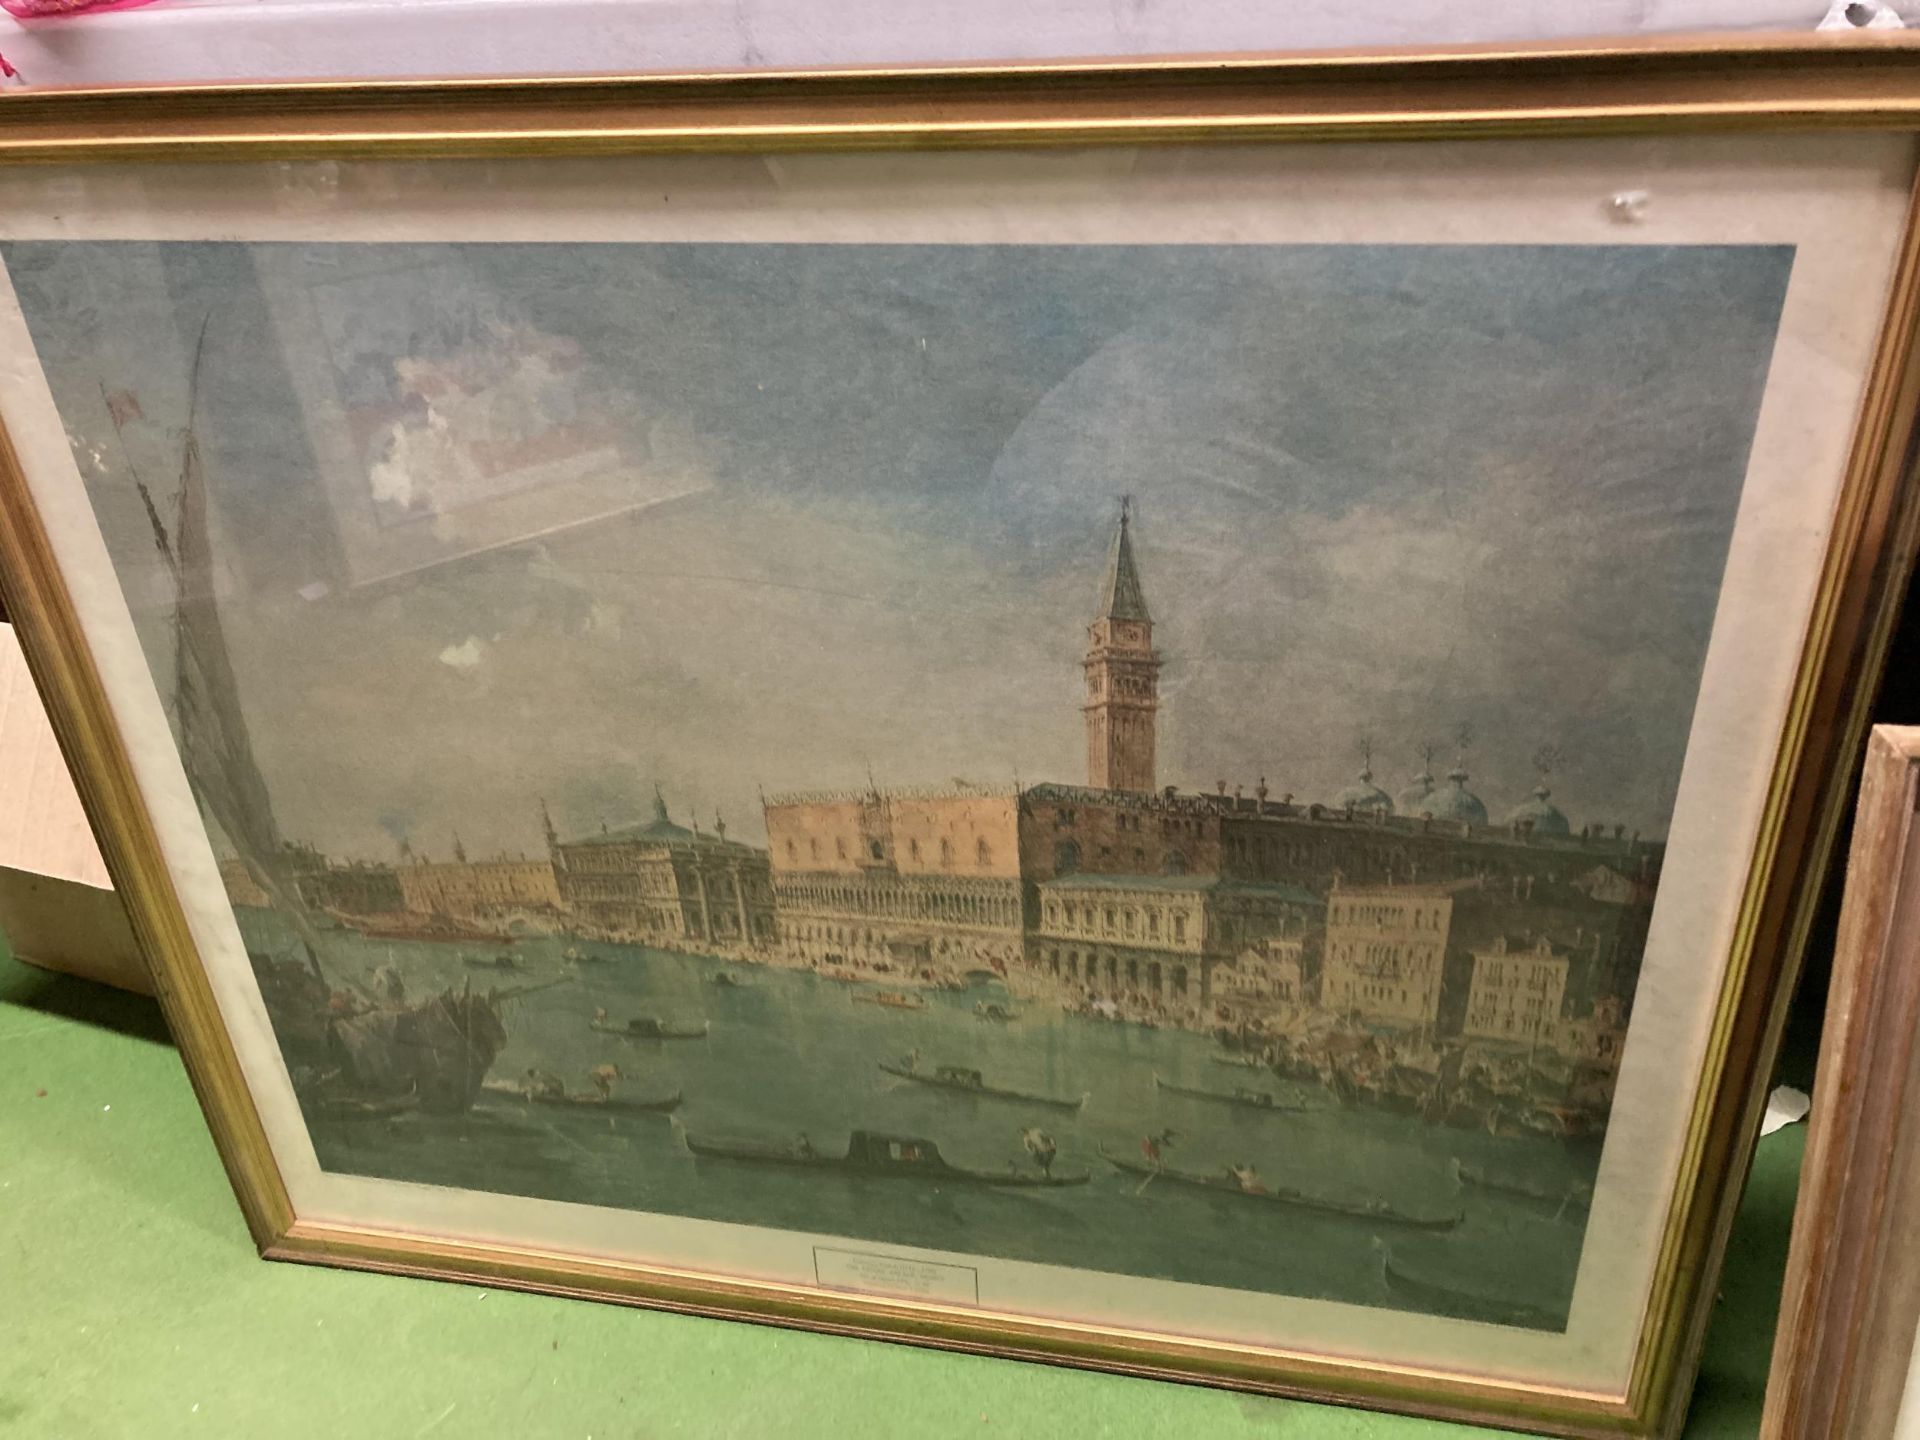 A PENCIL SKETCH OF SHEEP SIGNED K SCHRODER 27/3/22 PLUS A PRINT OF VENICE - Image 4 of 5